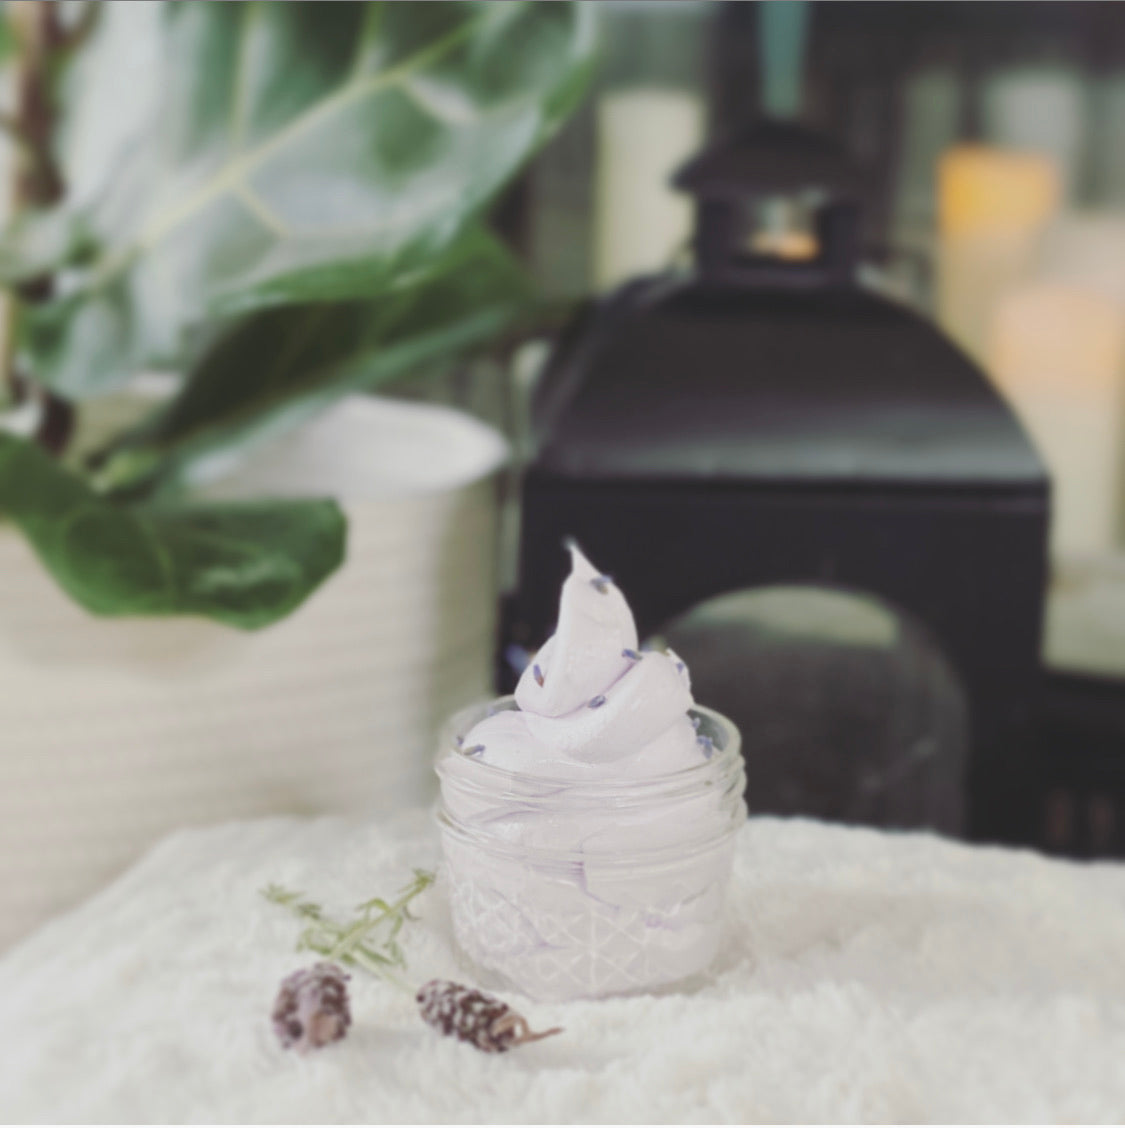 Black Amber & Lavender Whipped Bath Butter - Lavender and Lace Candles